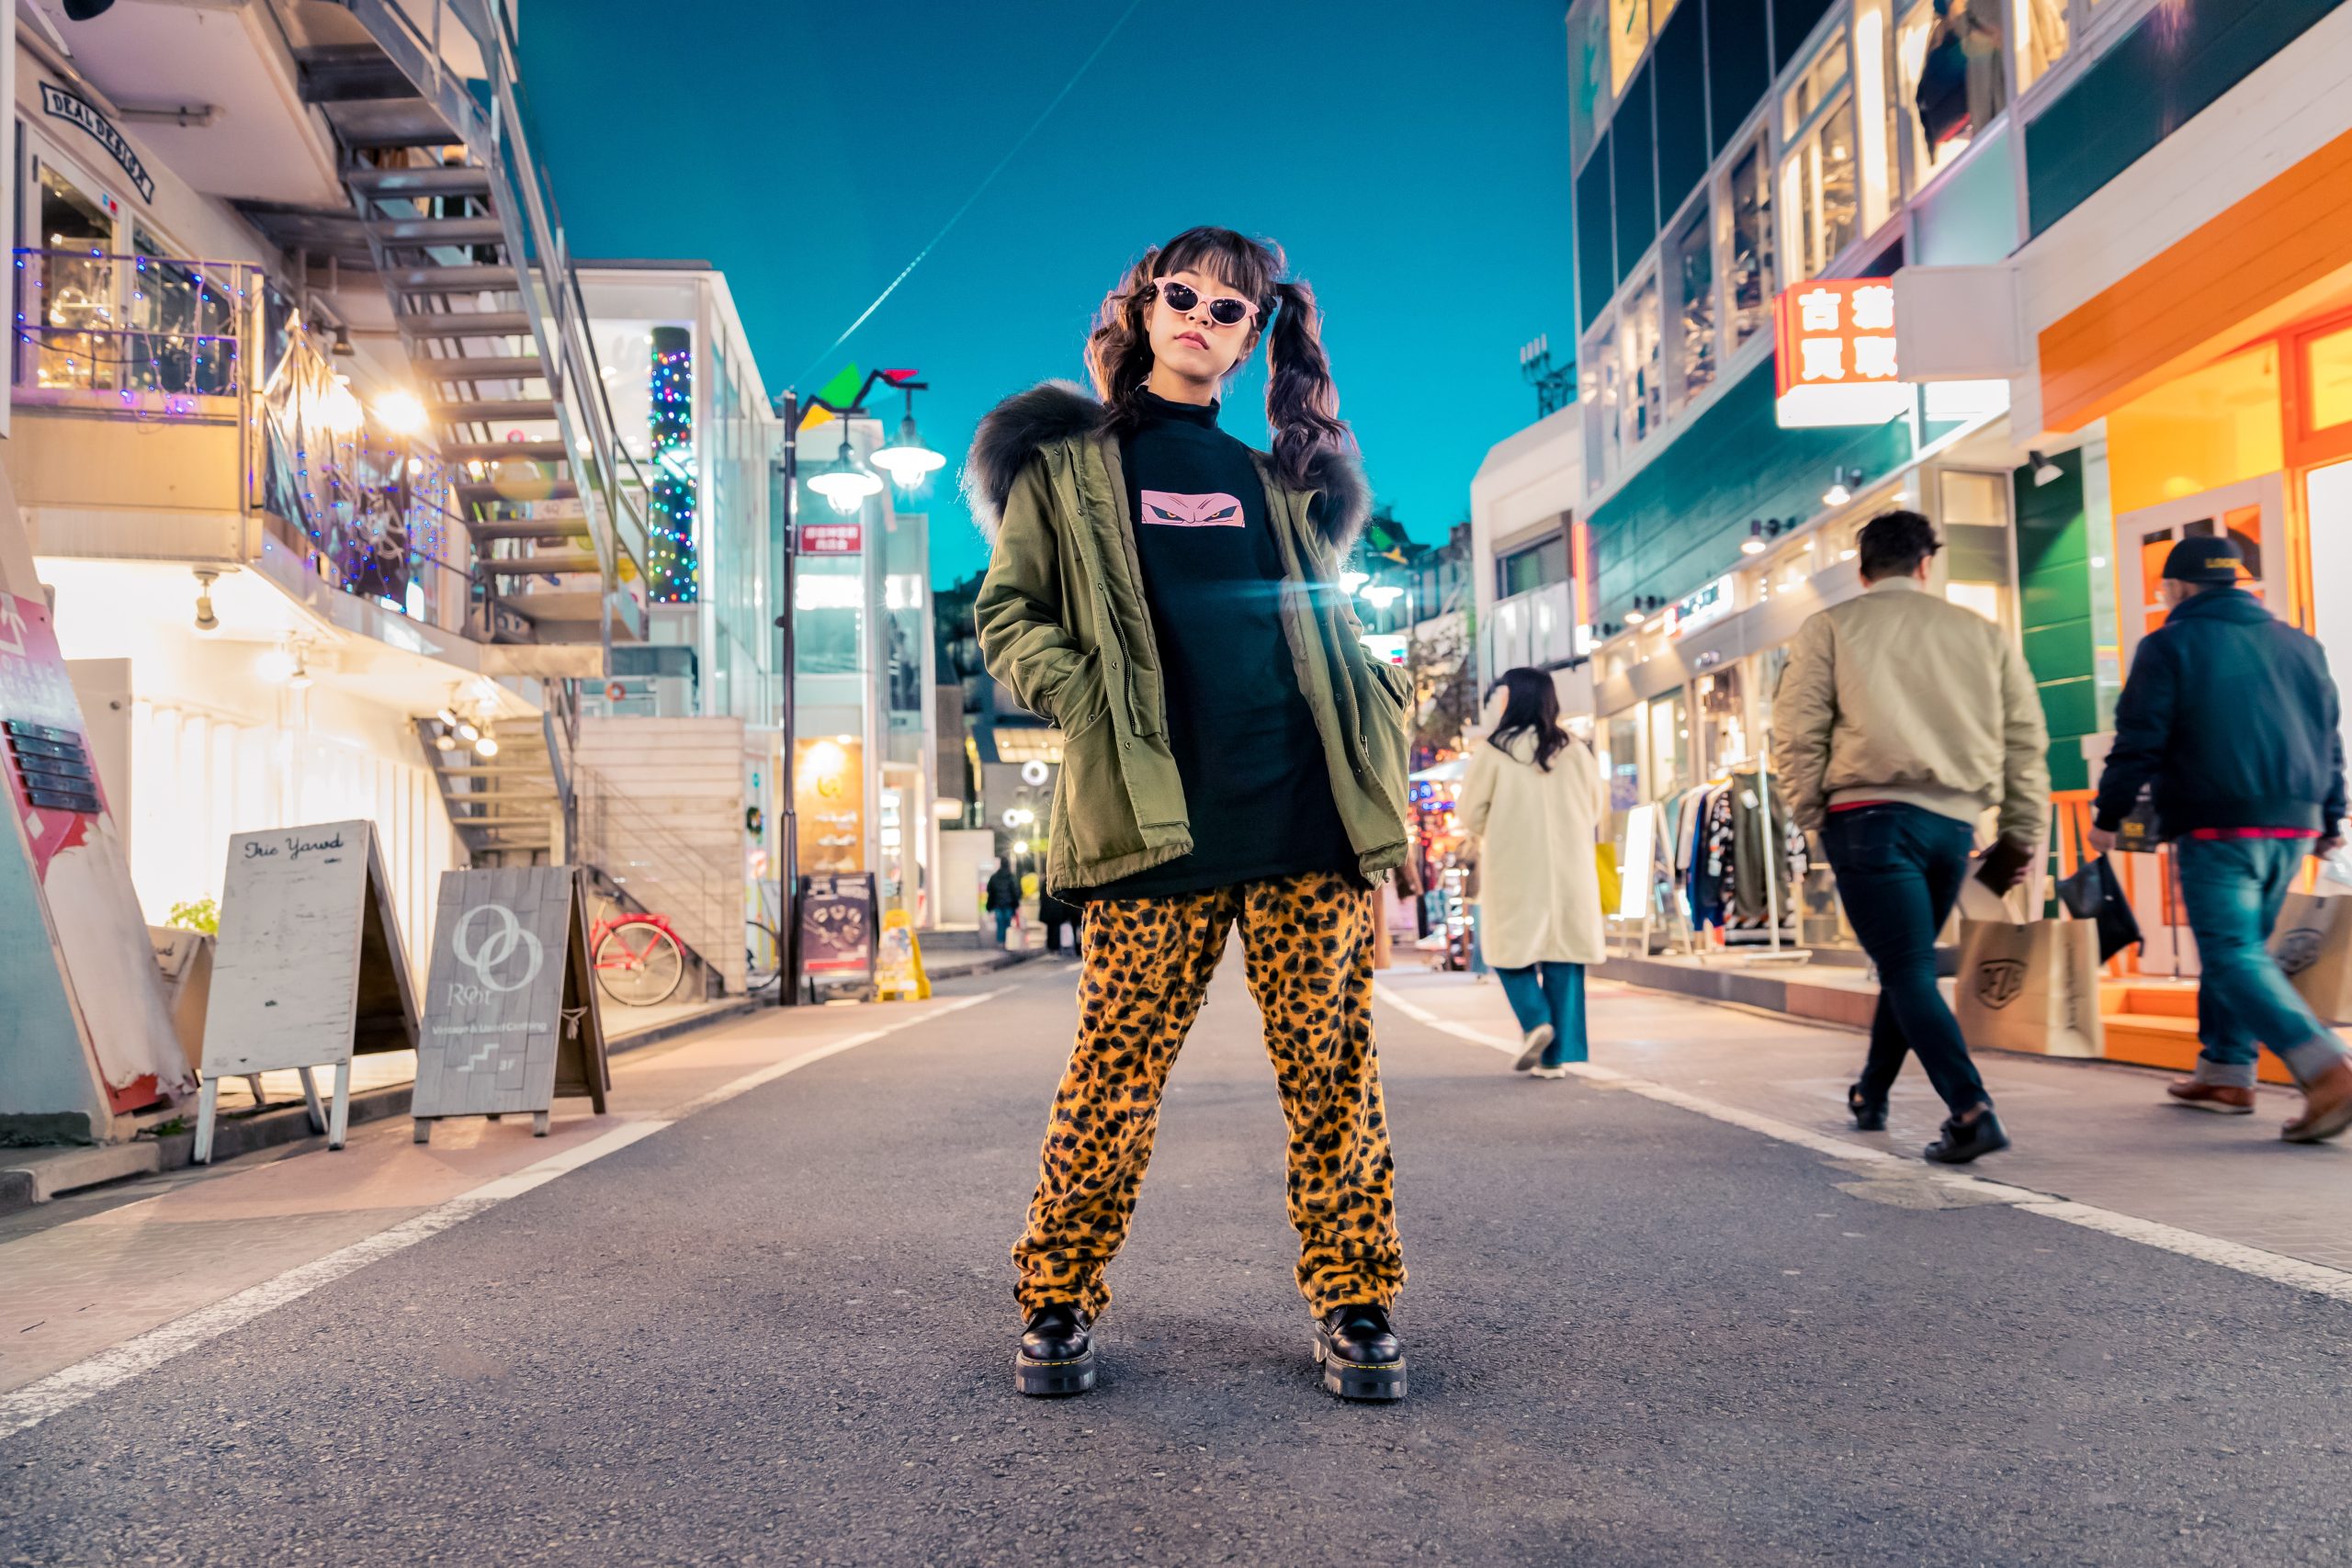 Shein chooses Tokyo for its first permanent space in the world - Inside  Retail Asia